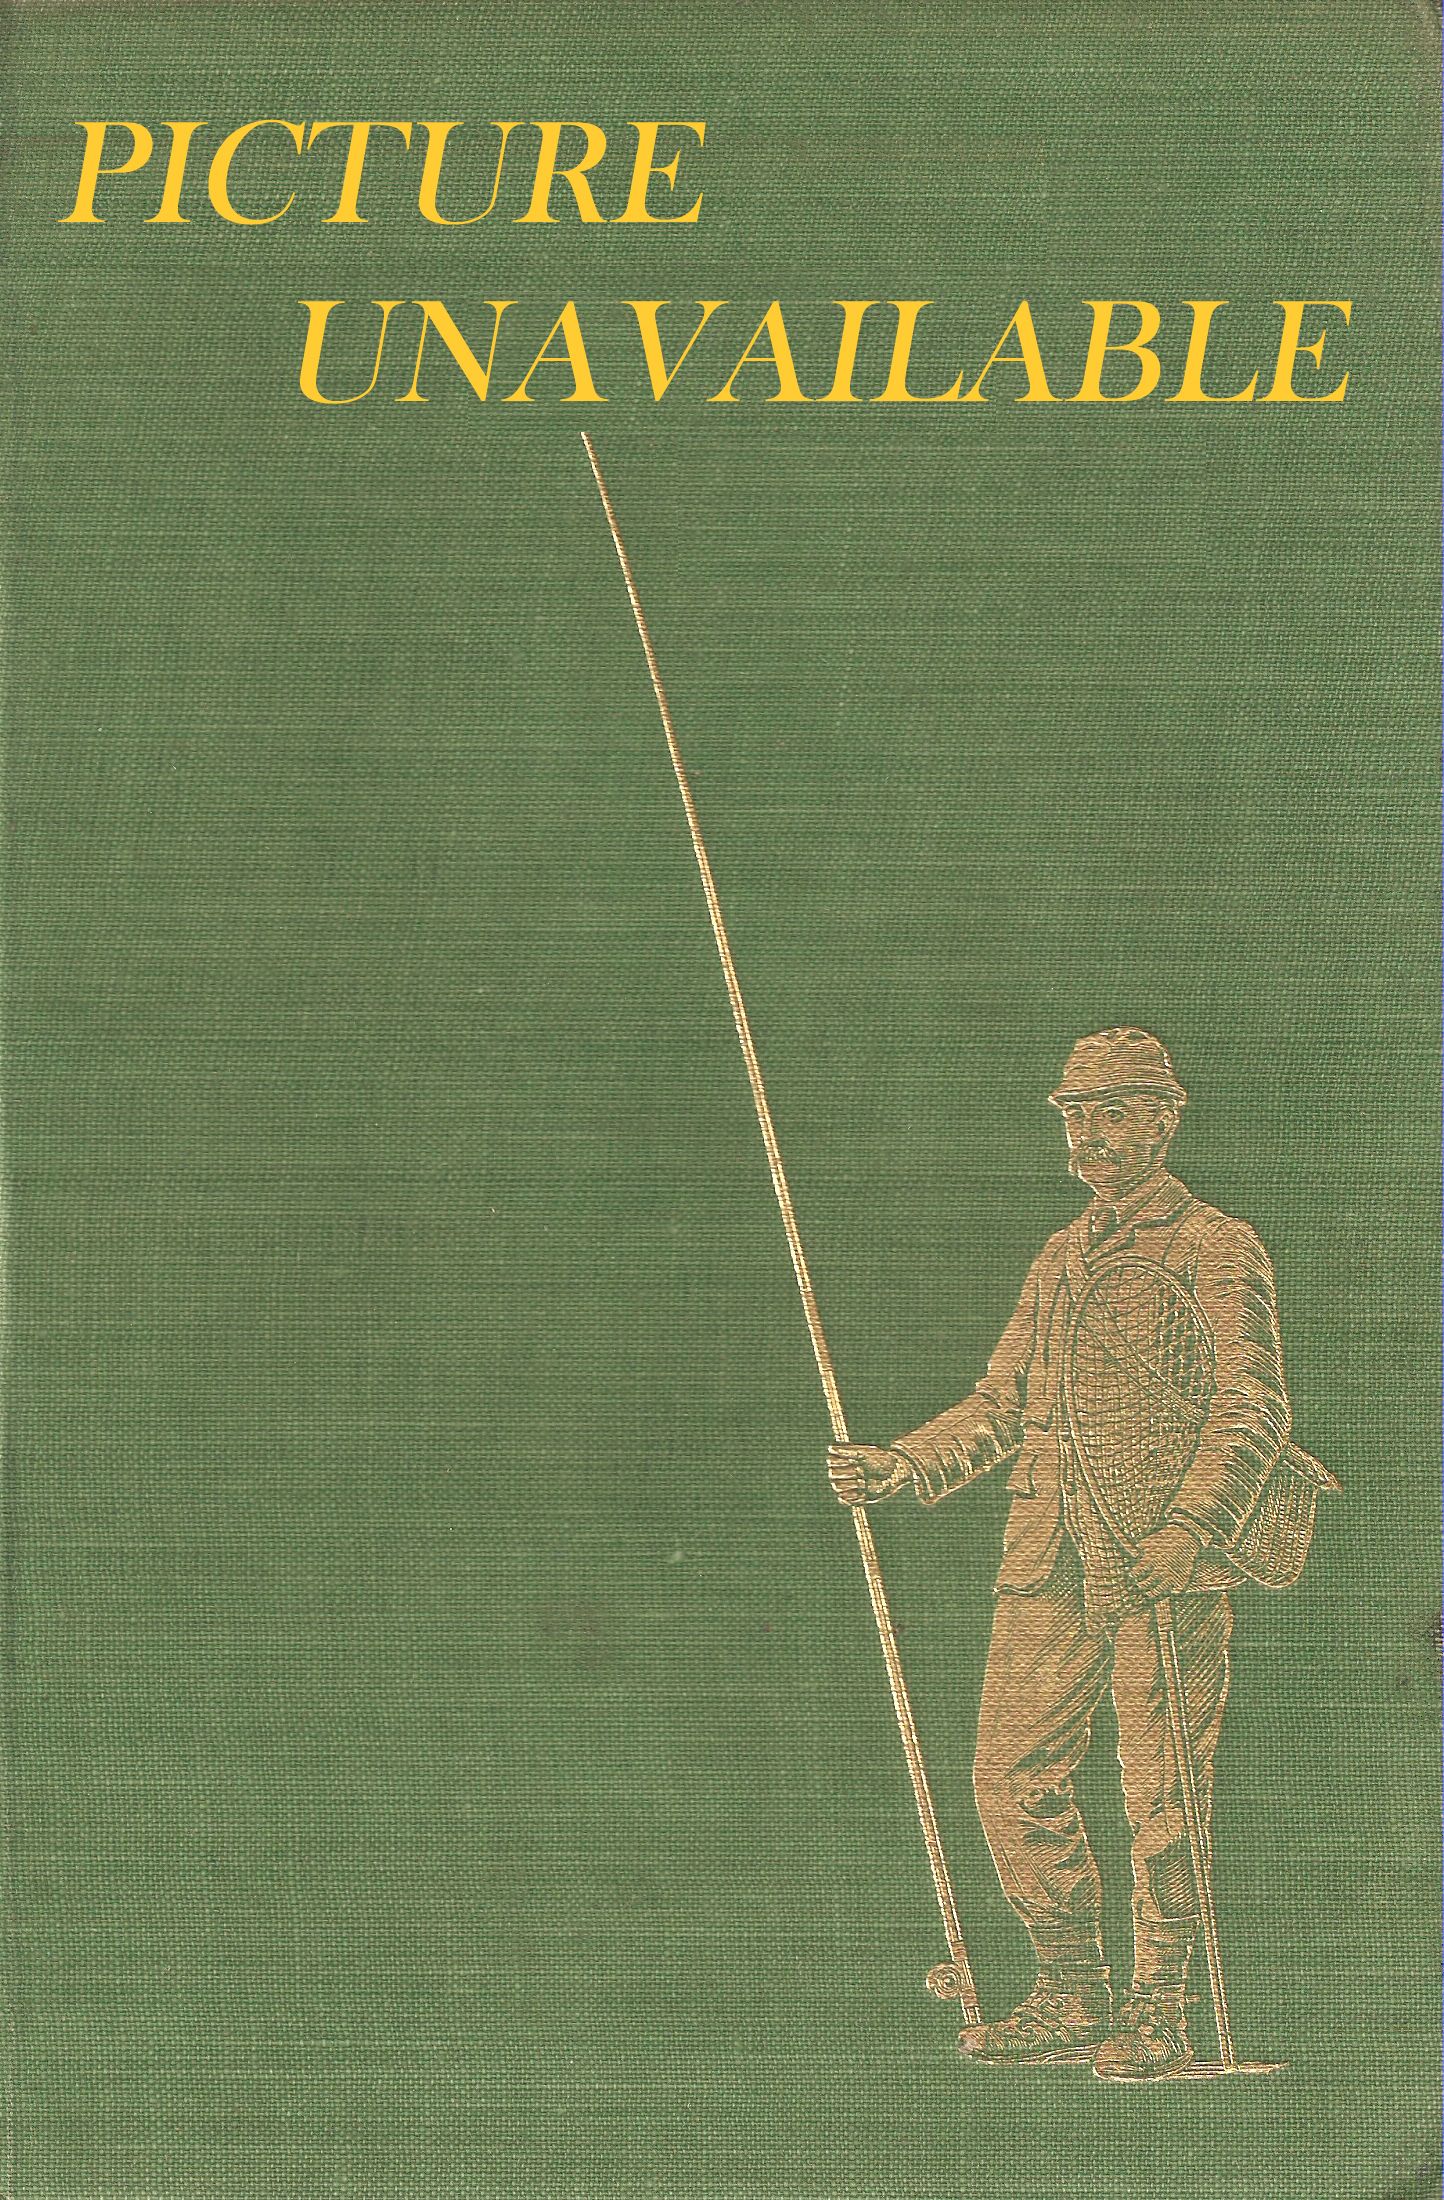 ANGLING IN COLOUR: (SEA, COARSE AND GAME). Edited by Alan Wrangles.